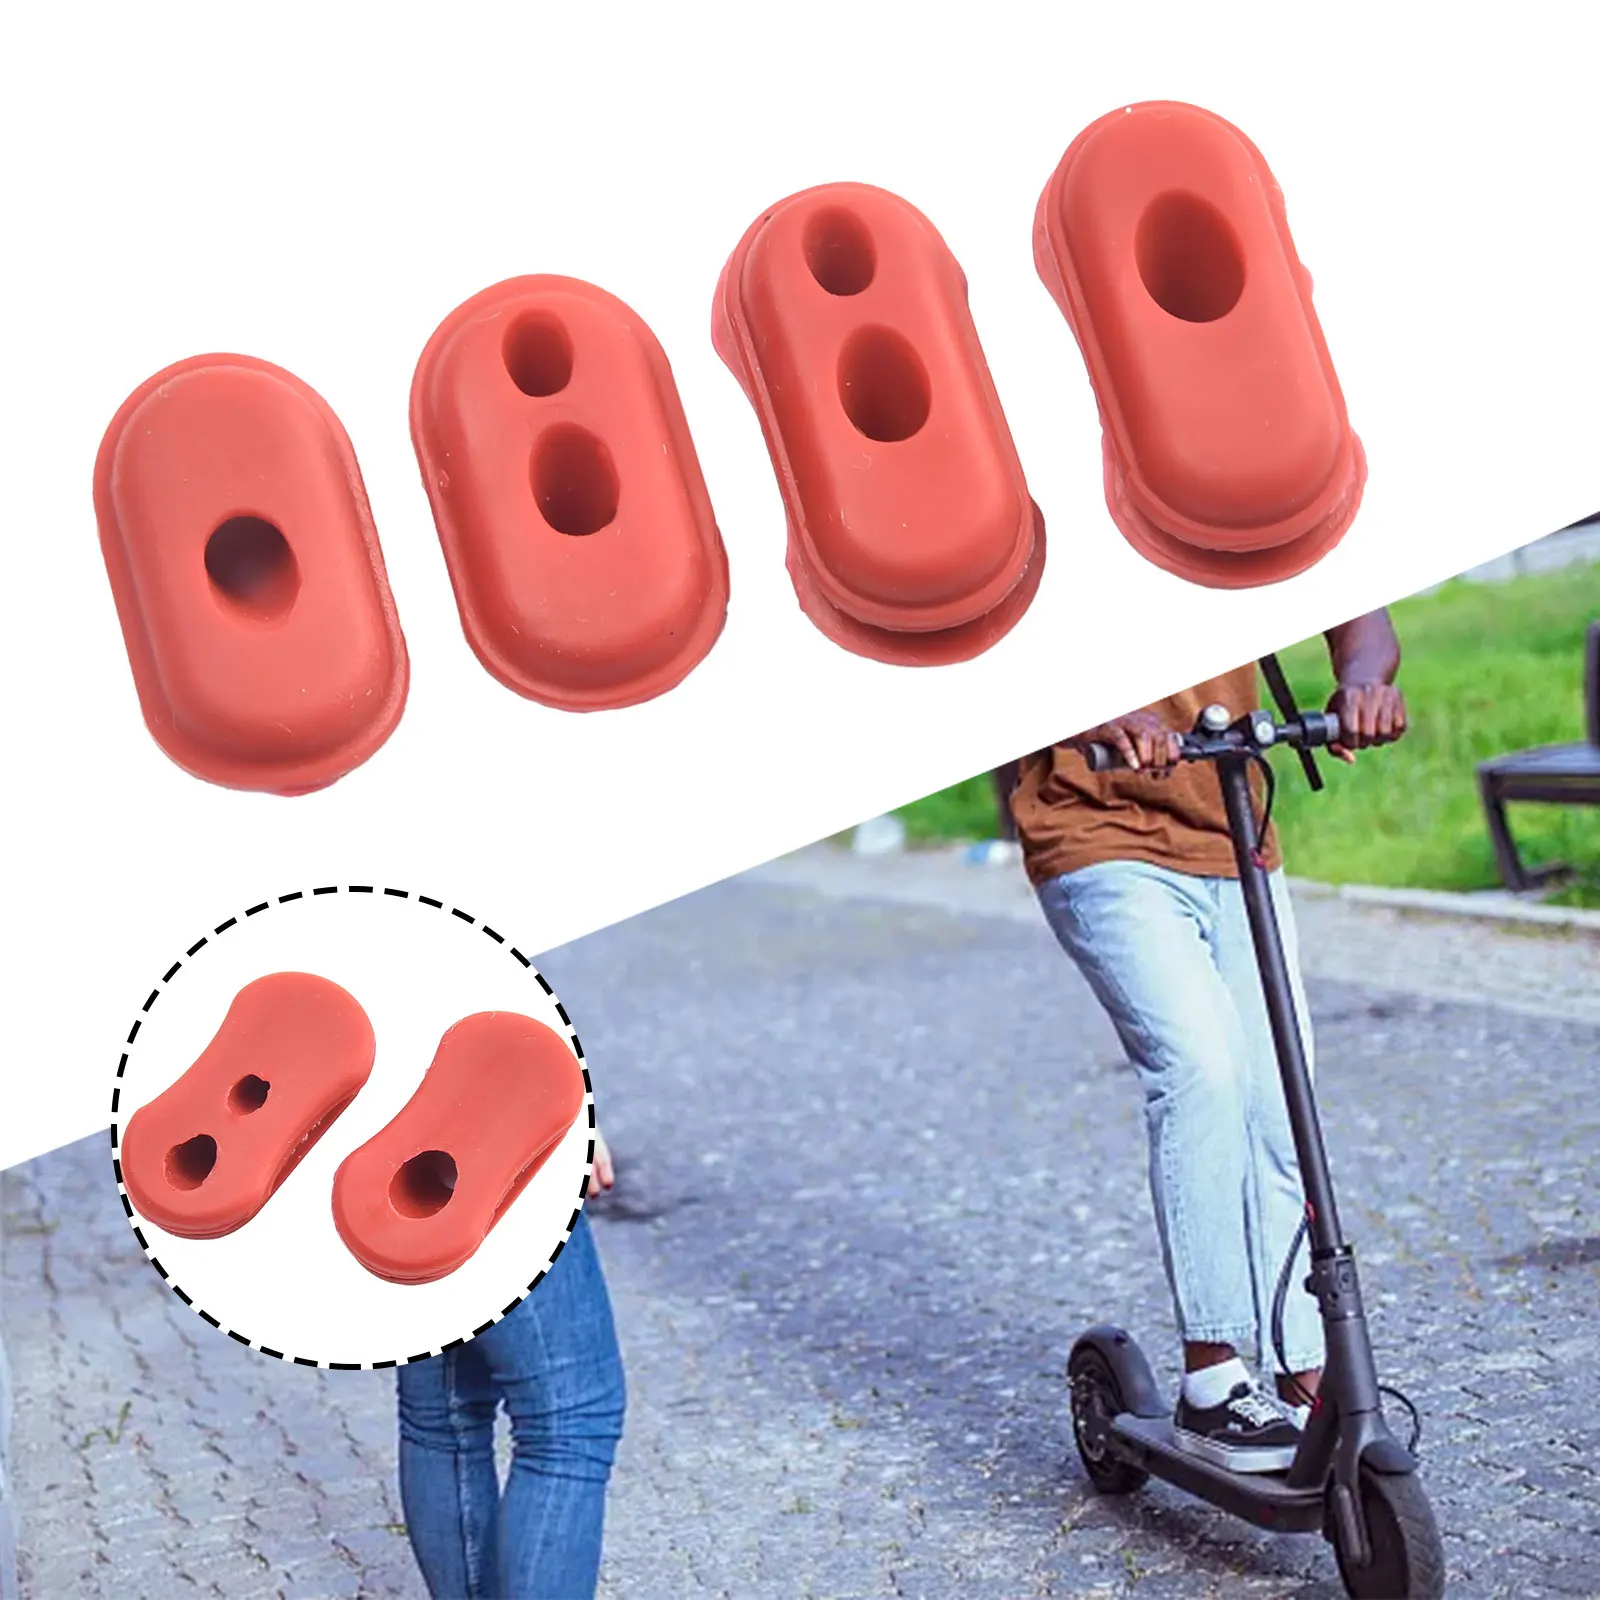 

4pcs Rubber Line Silicone Sleeve Charge Port Cover Wire Plug For Xiaomi M365/Pro Electric Scooter Accessories 30*15*10mm